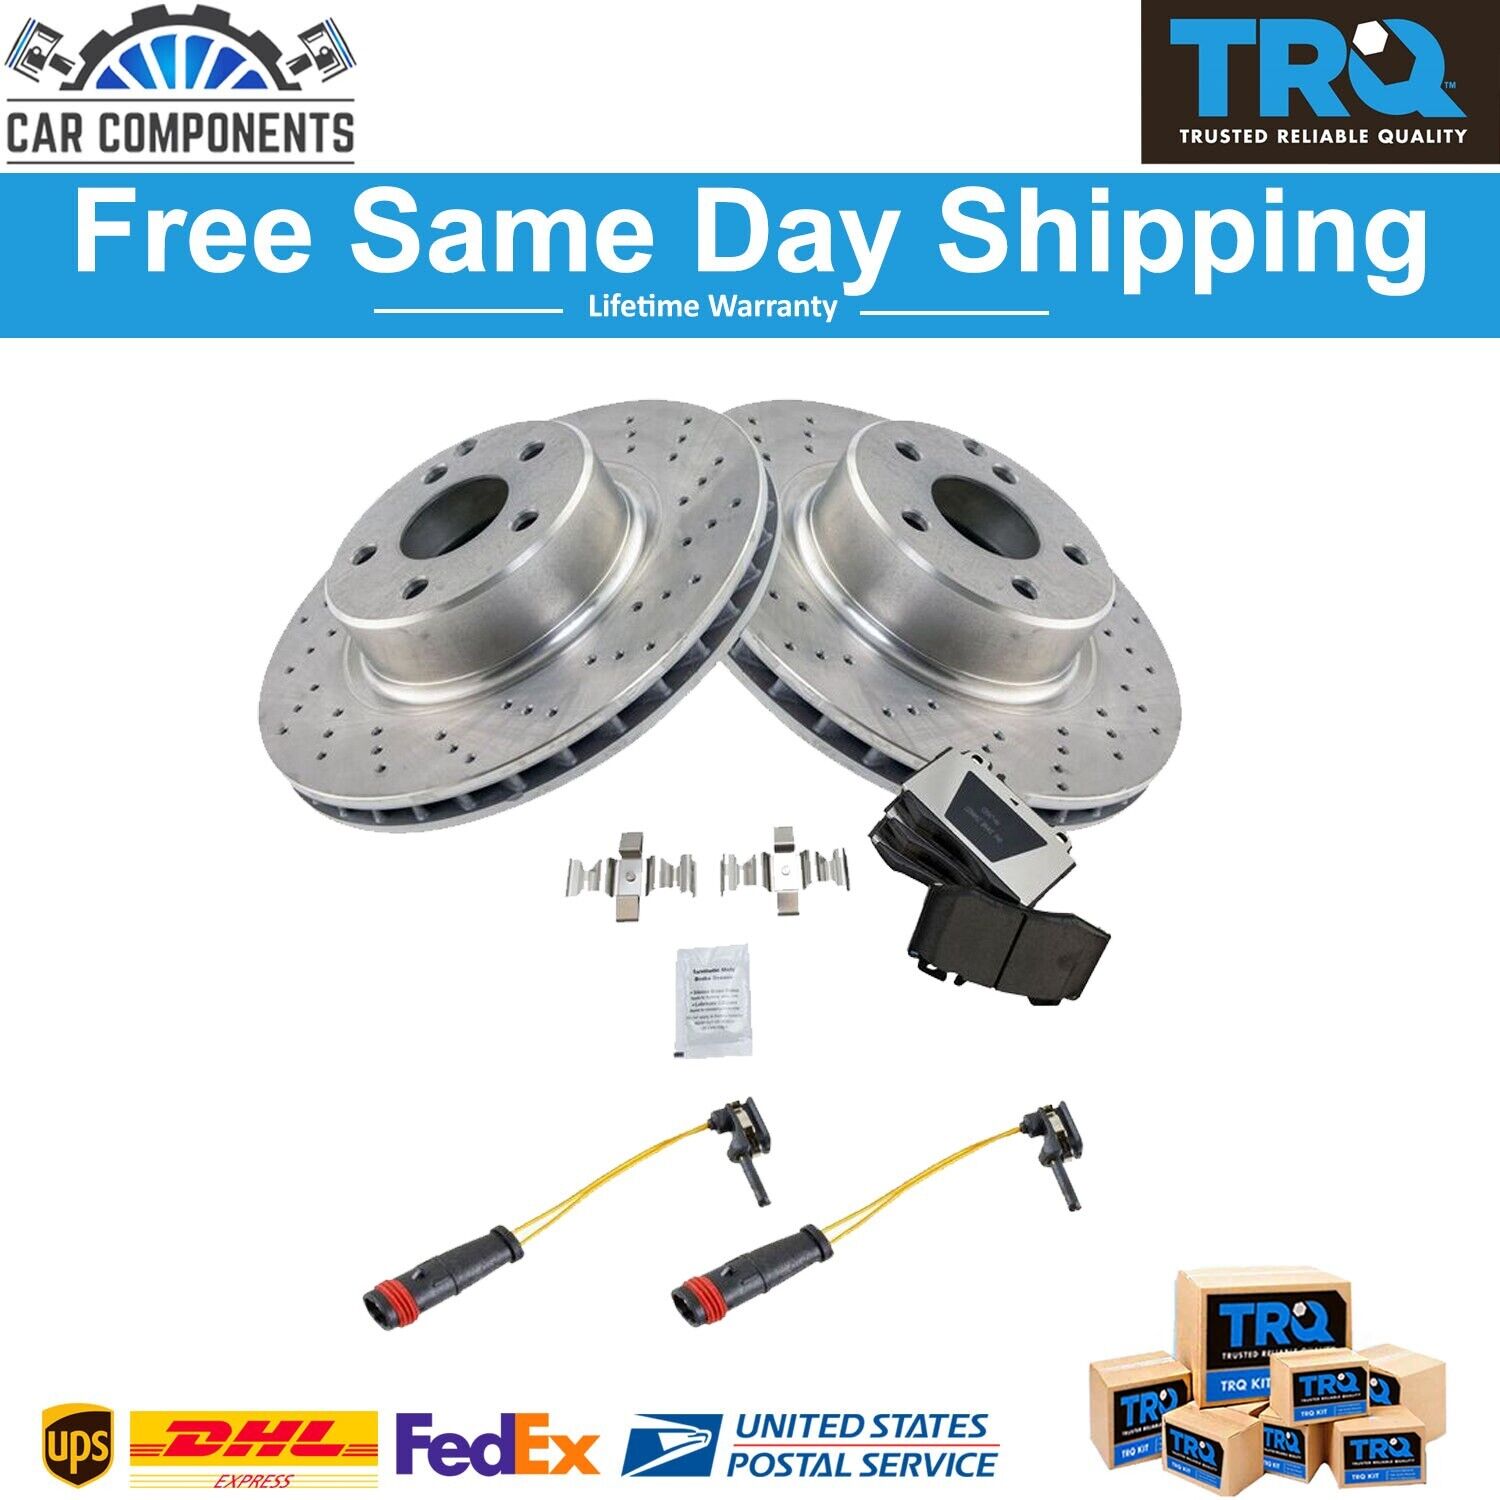 TRQ New Front Brake Pad & Rotor Kit For 2003-2006 Mercedes Benz CL500 S500